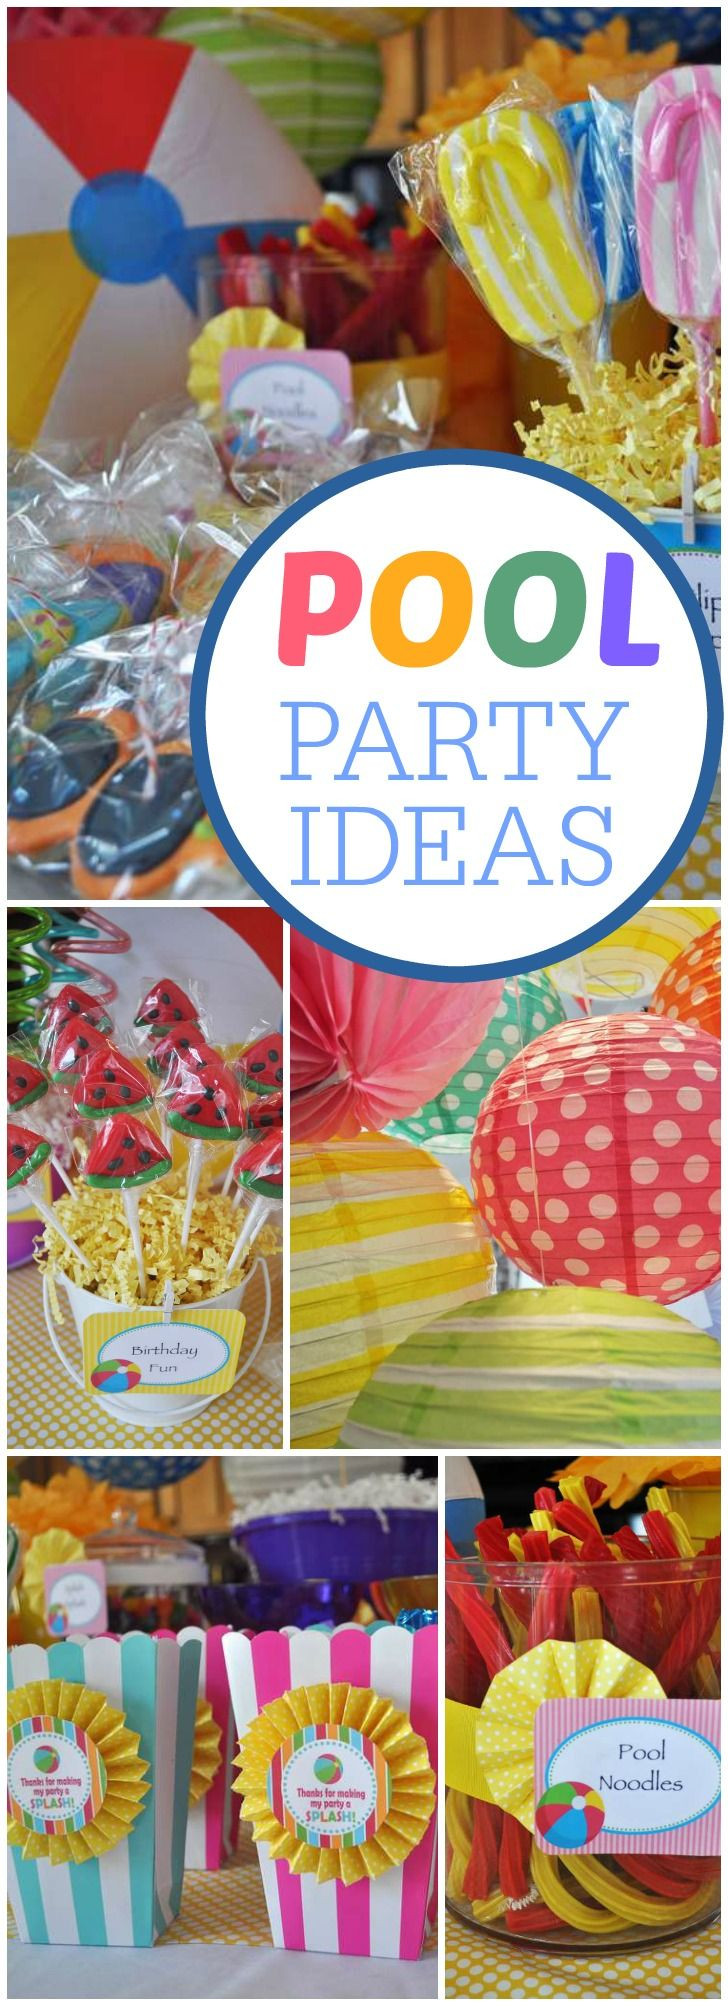 Swimming Pool Birthday Party Ideas
 Best 25 Pool party birthday ideas on Pinterest